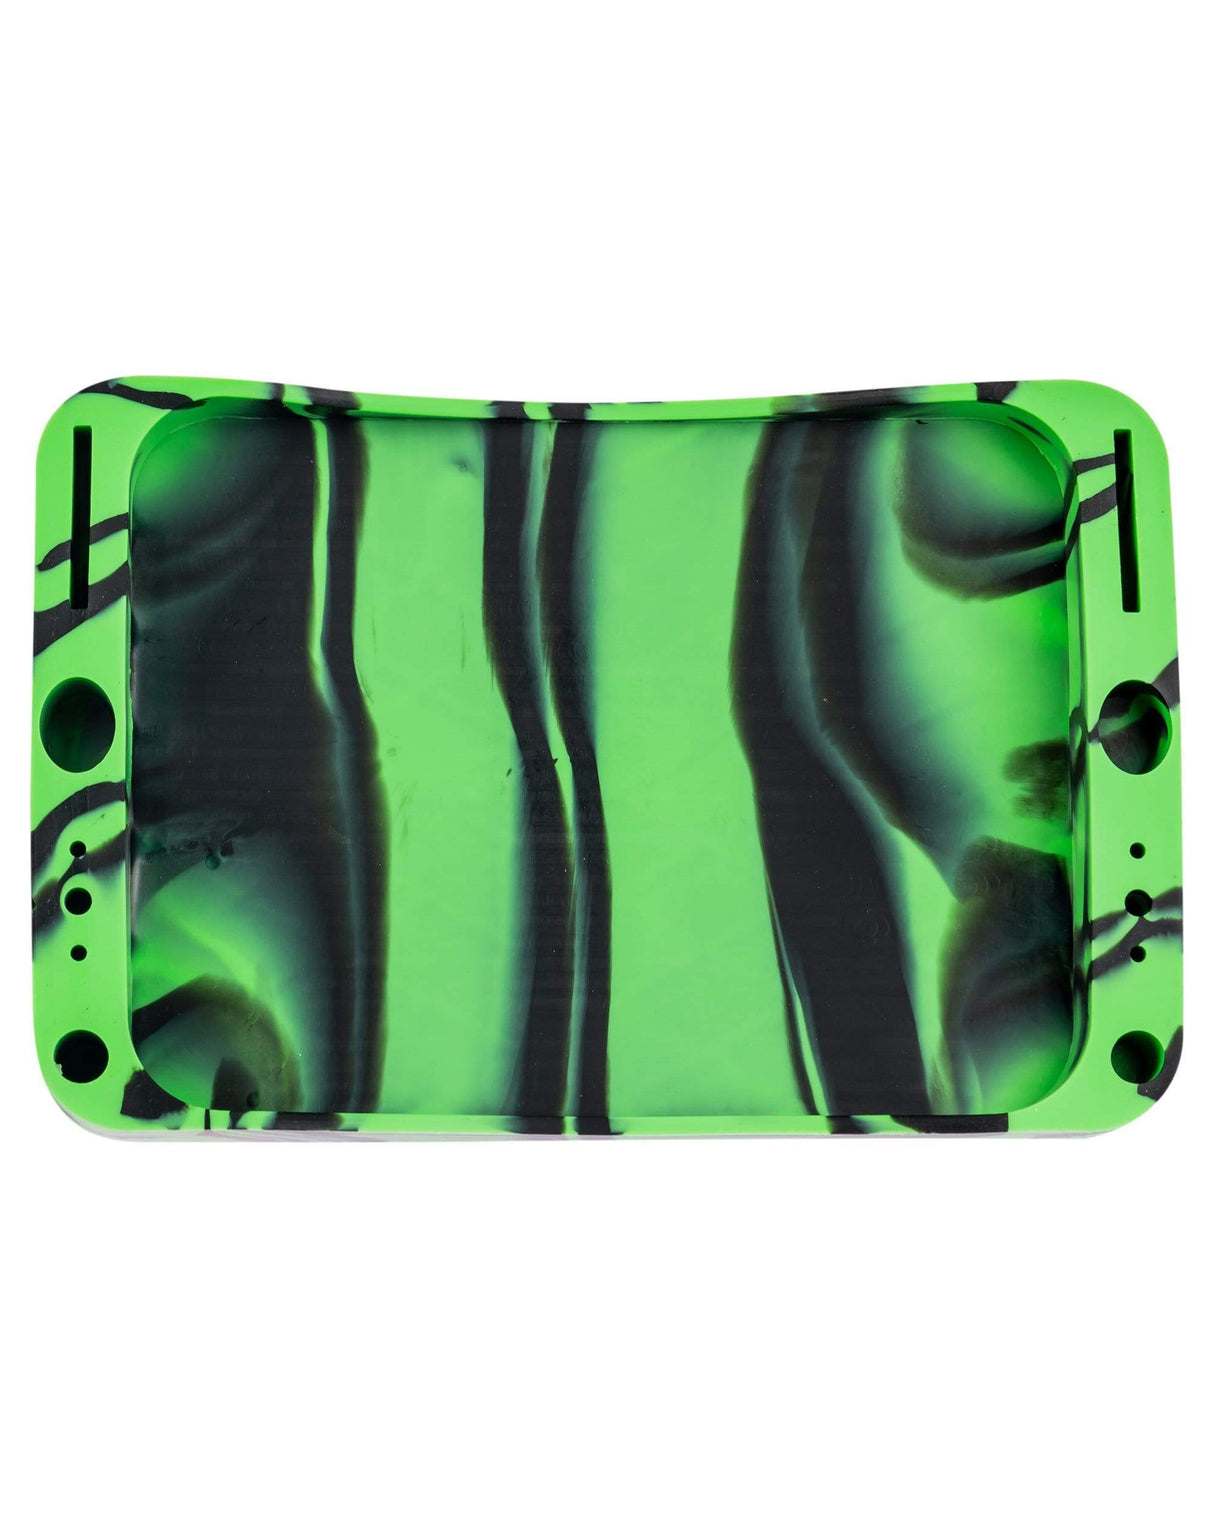 Ooze Dab Depot 3 Piece Combo Tray in black and green, large silicone rolling accessory